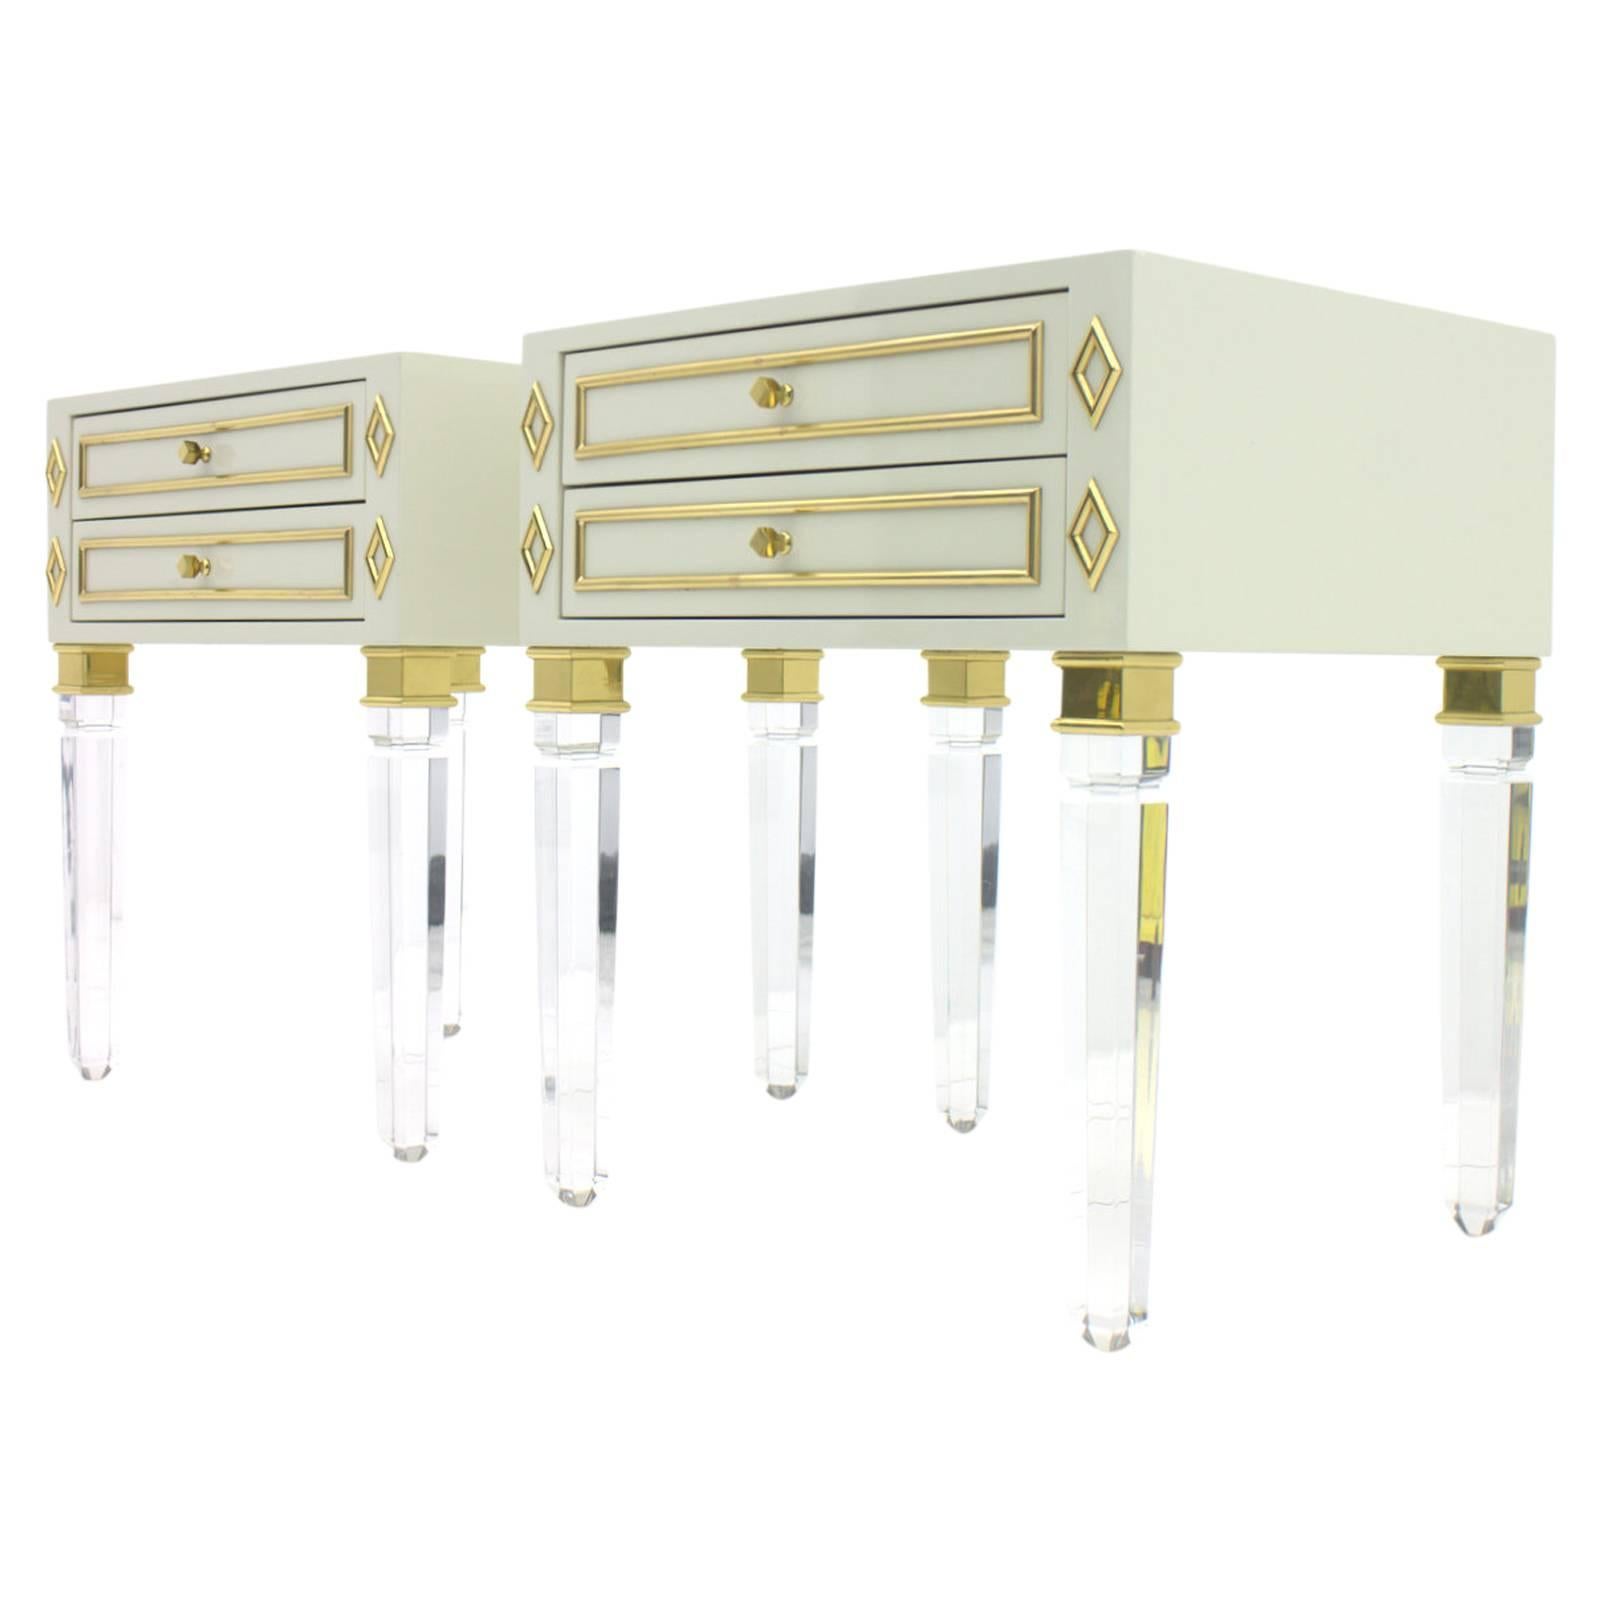 Pair of Nightstands, Lucite, Wood and Brass, 1970s